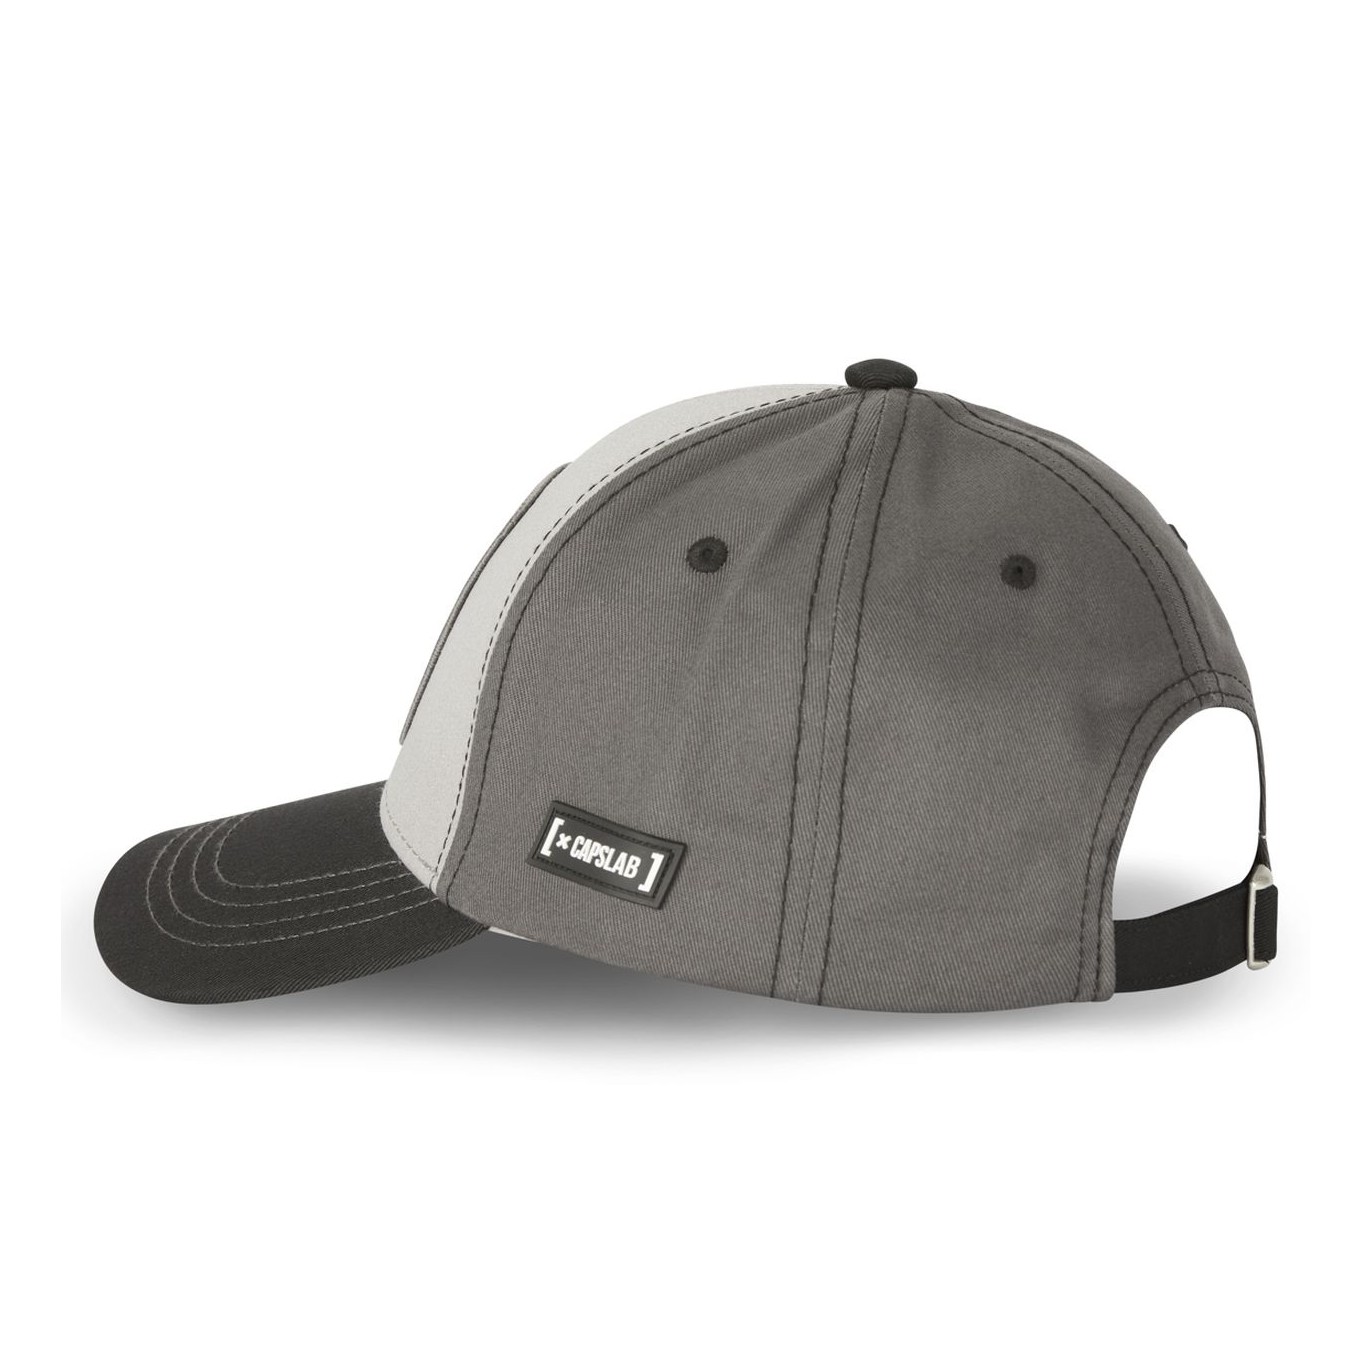 Casquette Baseball Tom And Jerry Boucle Gris Capslab Capslab - 4